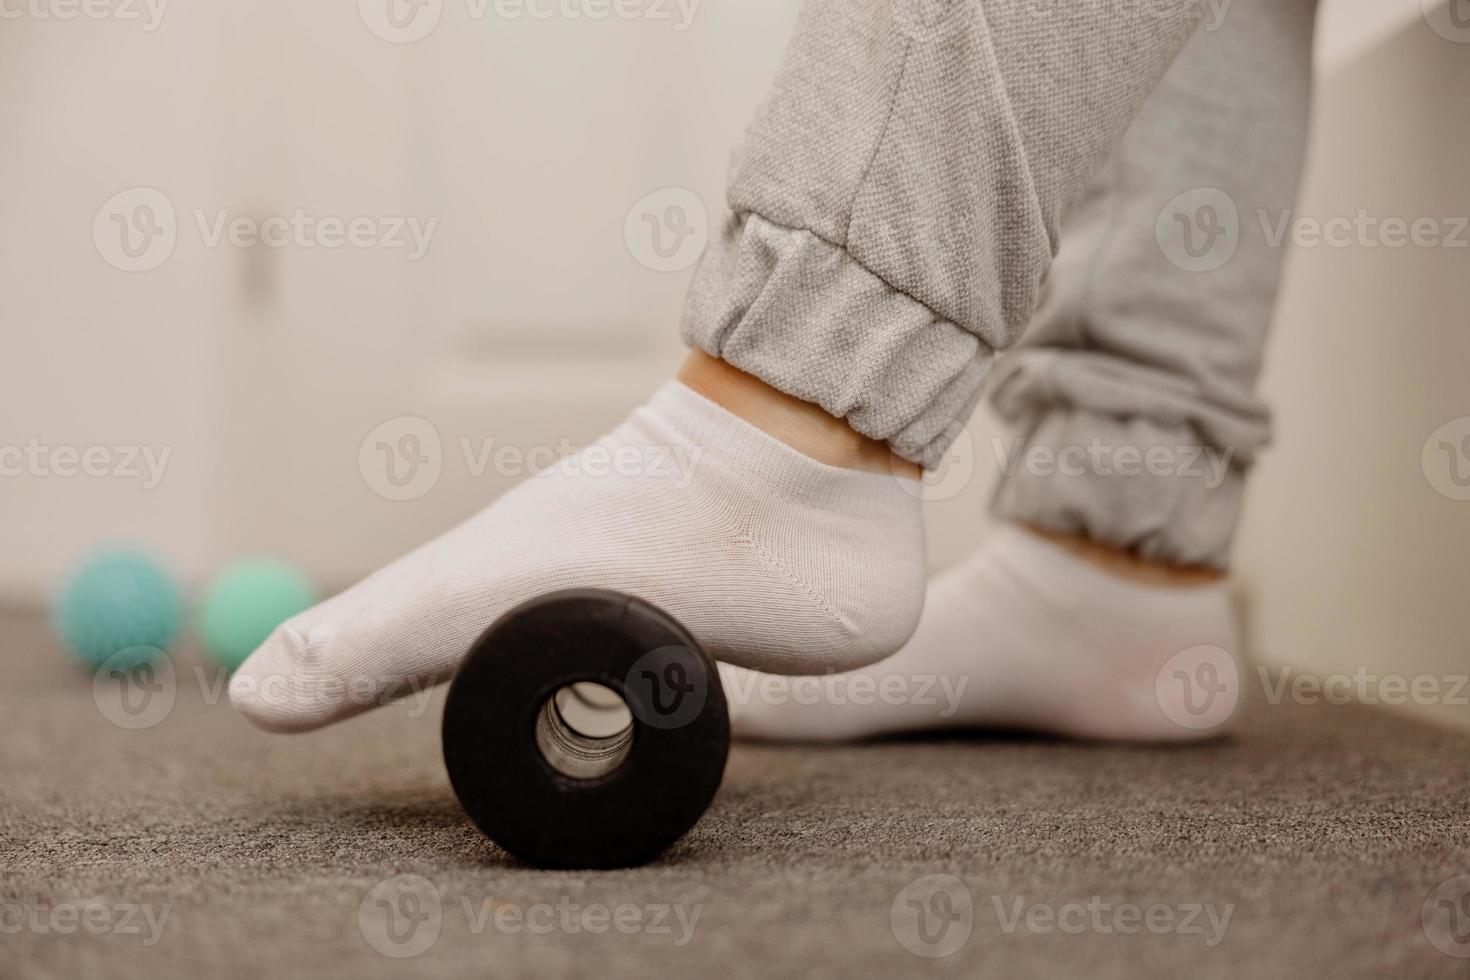 Woman doing flatfoot correction gymnastic exercise using massage roller. Myofascial relaxation of foot muscles. Hallux valgus. Pain. Identification of flat feet. Self care practices at home, health. photo